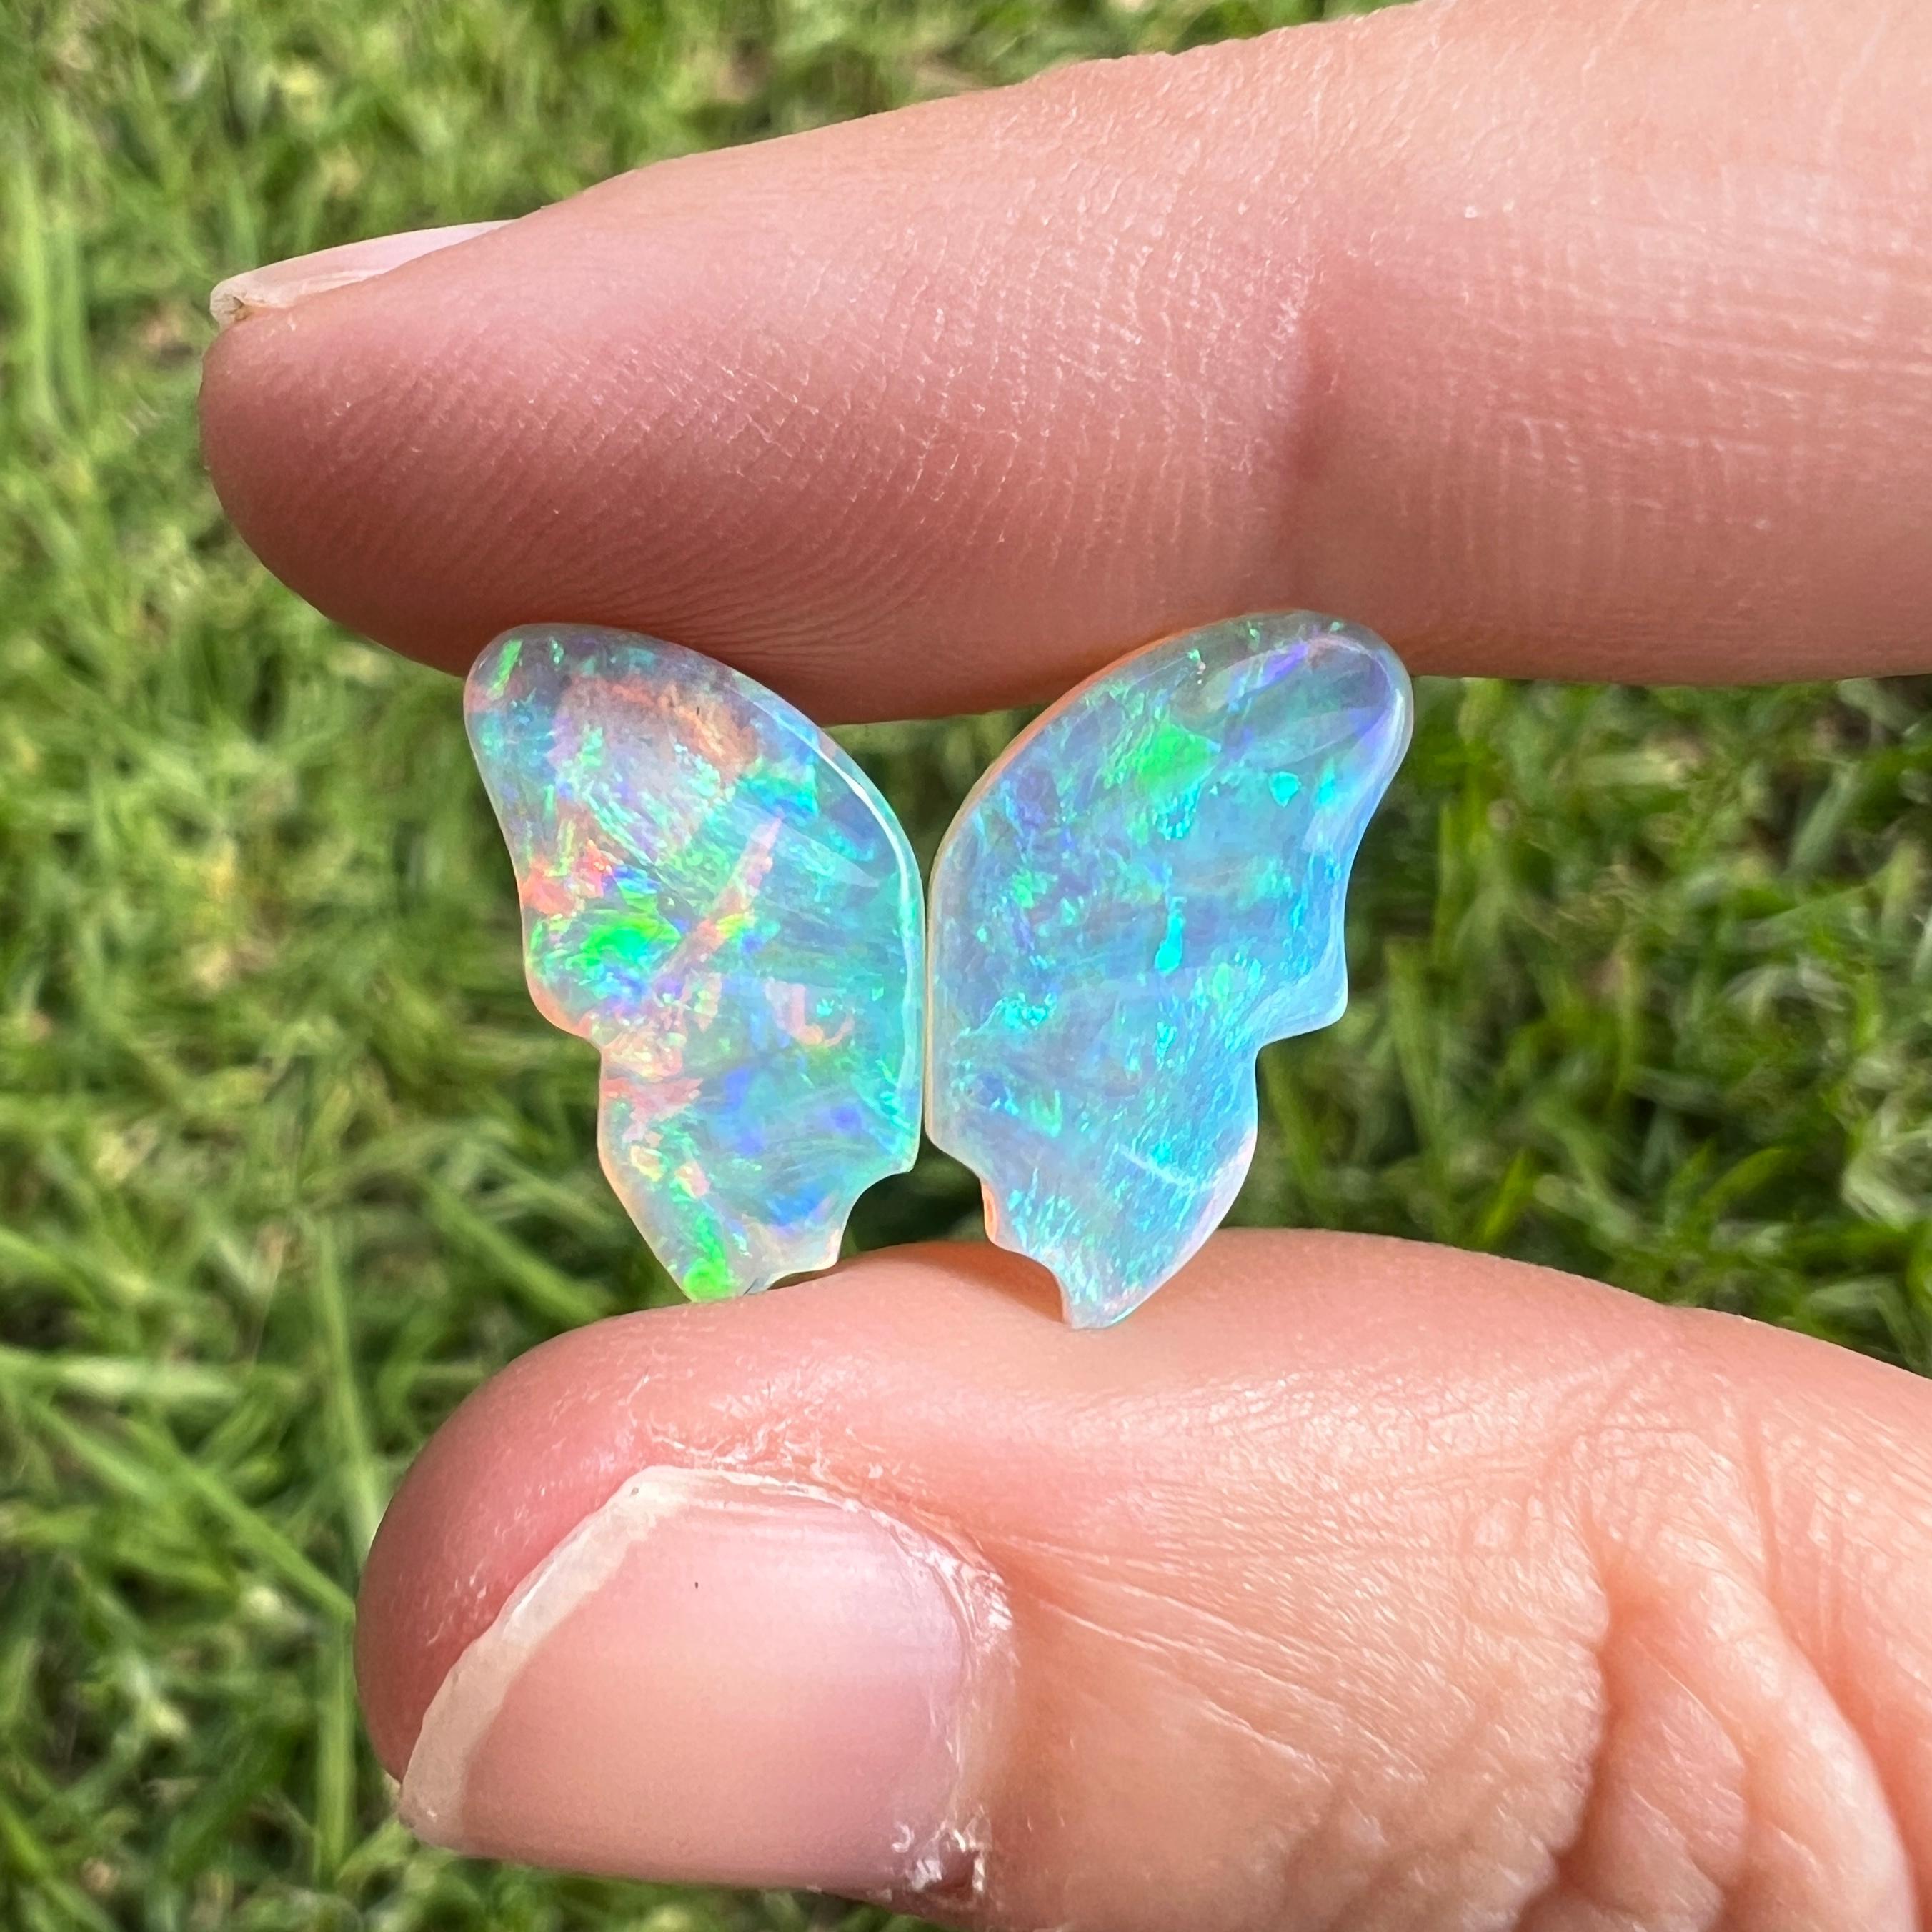 This beautiful 5.53 Ct natural Australian gem crystal opal, carved into a pair of butterfly wings, is a truly exceptional addition to any collection, mined by Sue Cooper herself. Its rarity, coupled with the amazing winged carving, captivates